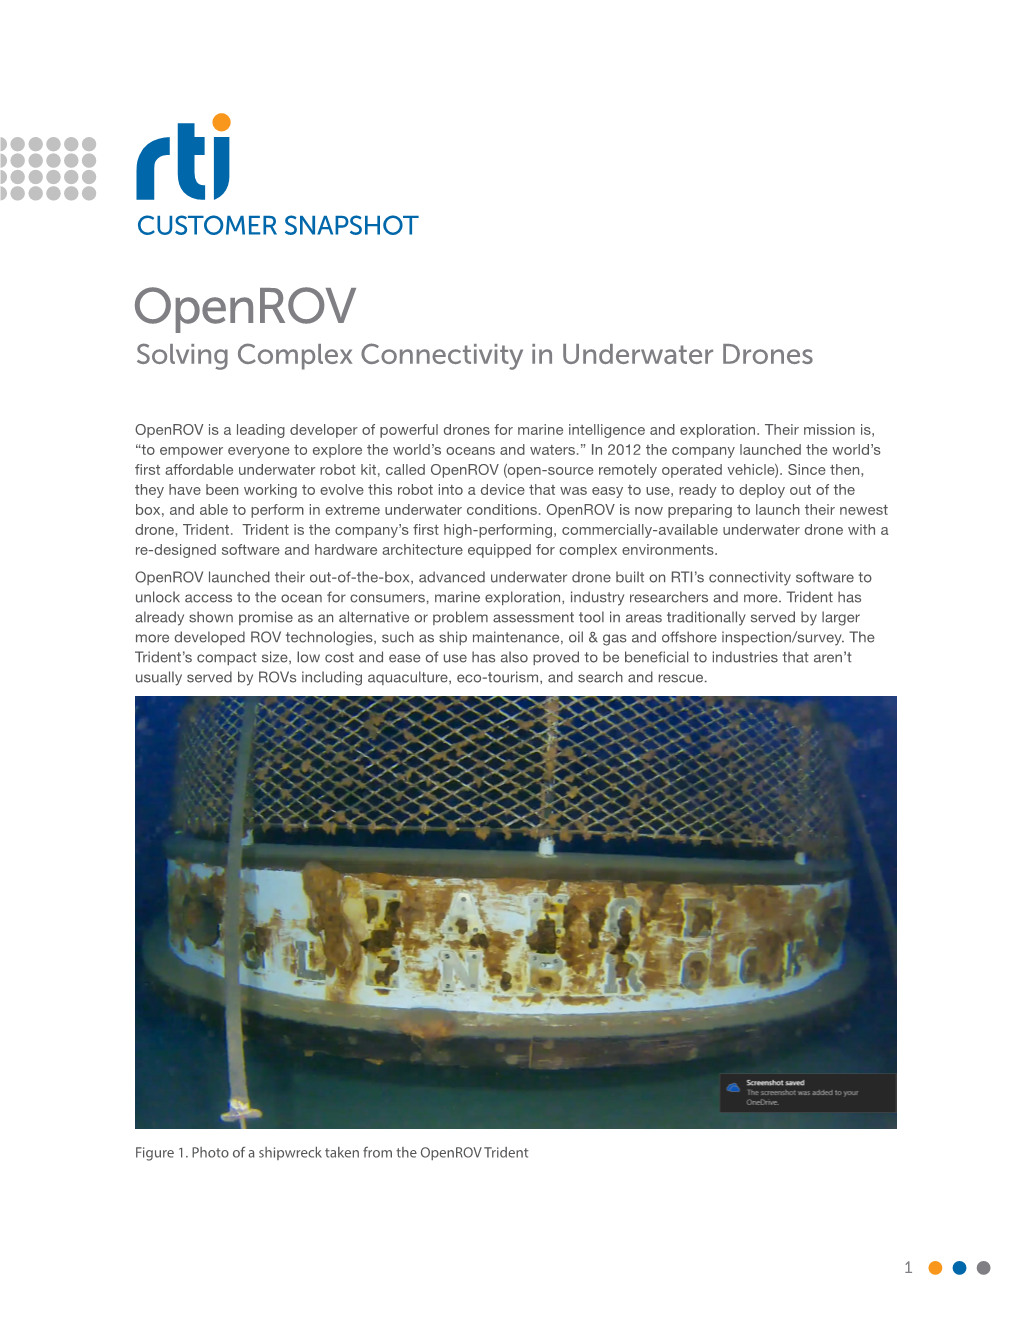 Openrov Solving Complex Connectivity in Underwater Drones